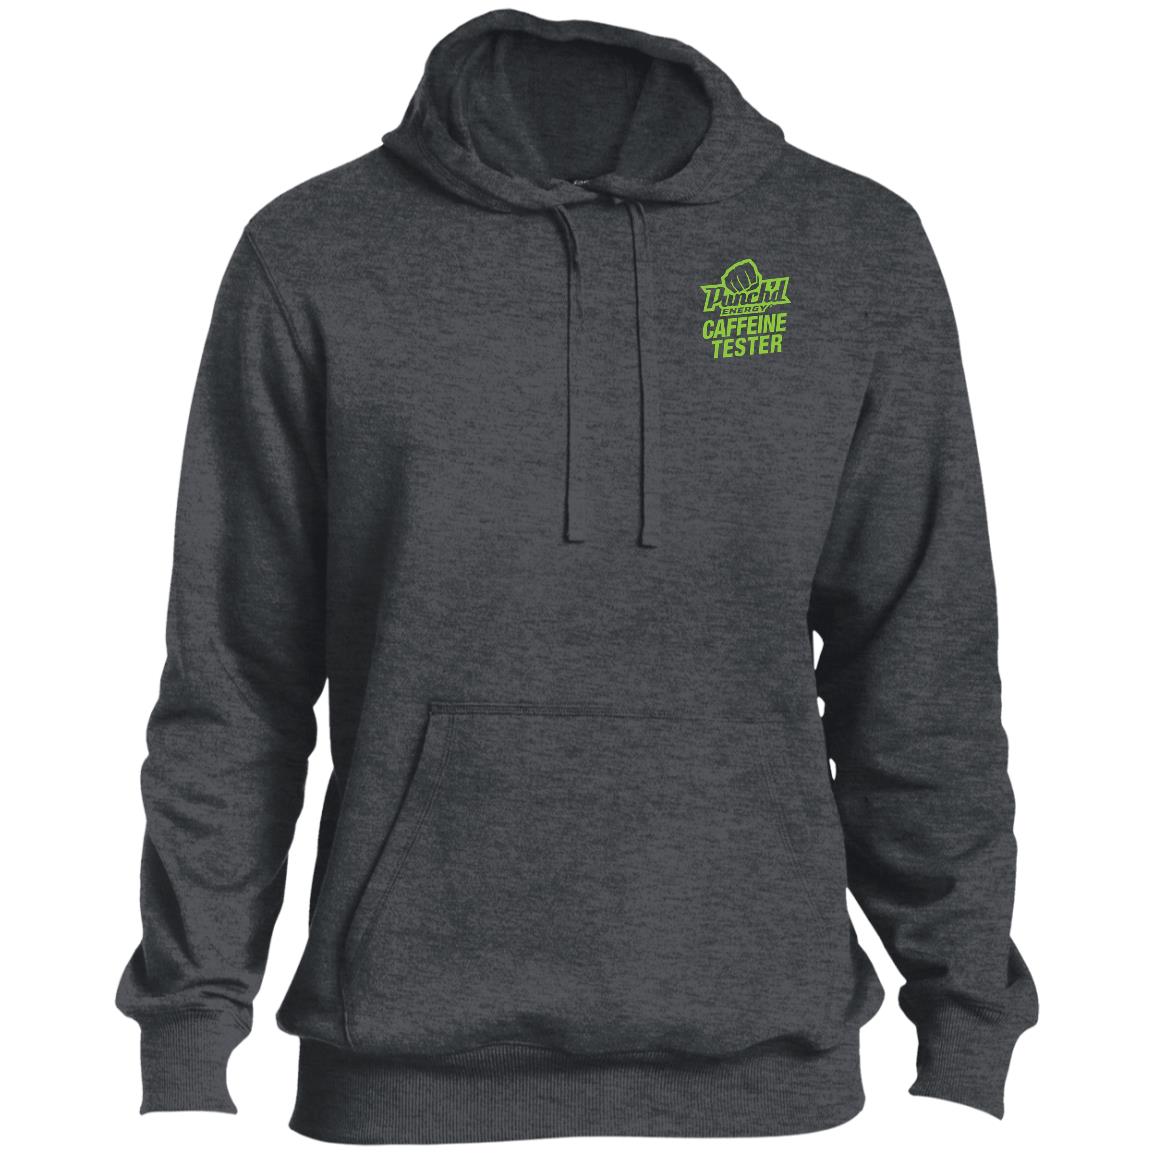 Punch'd Pullover Hoodie